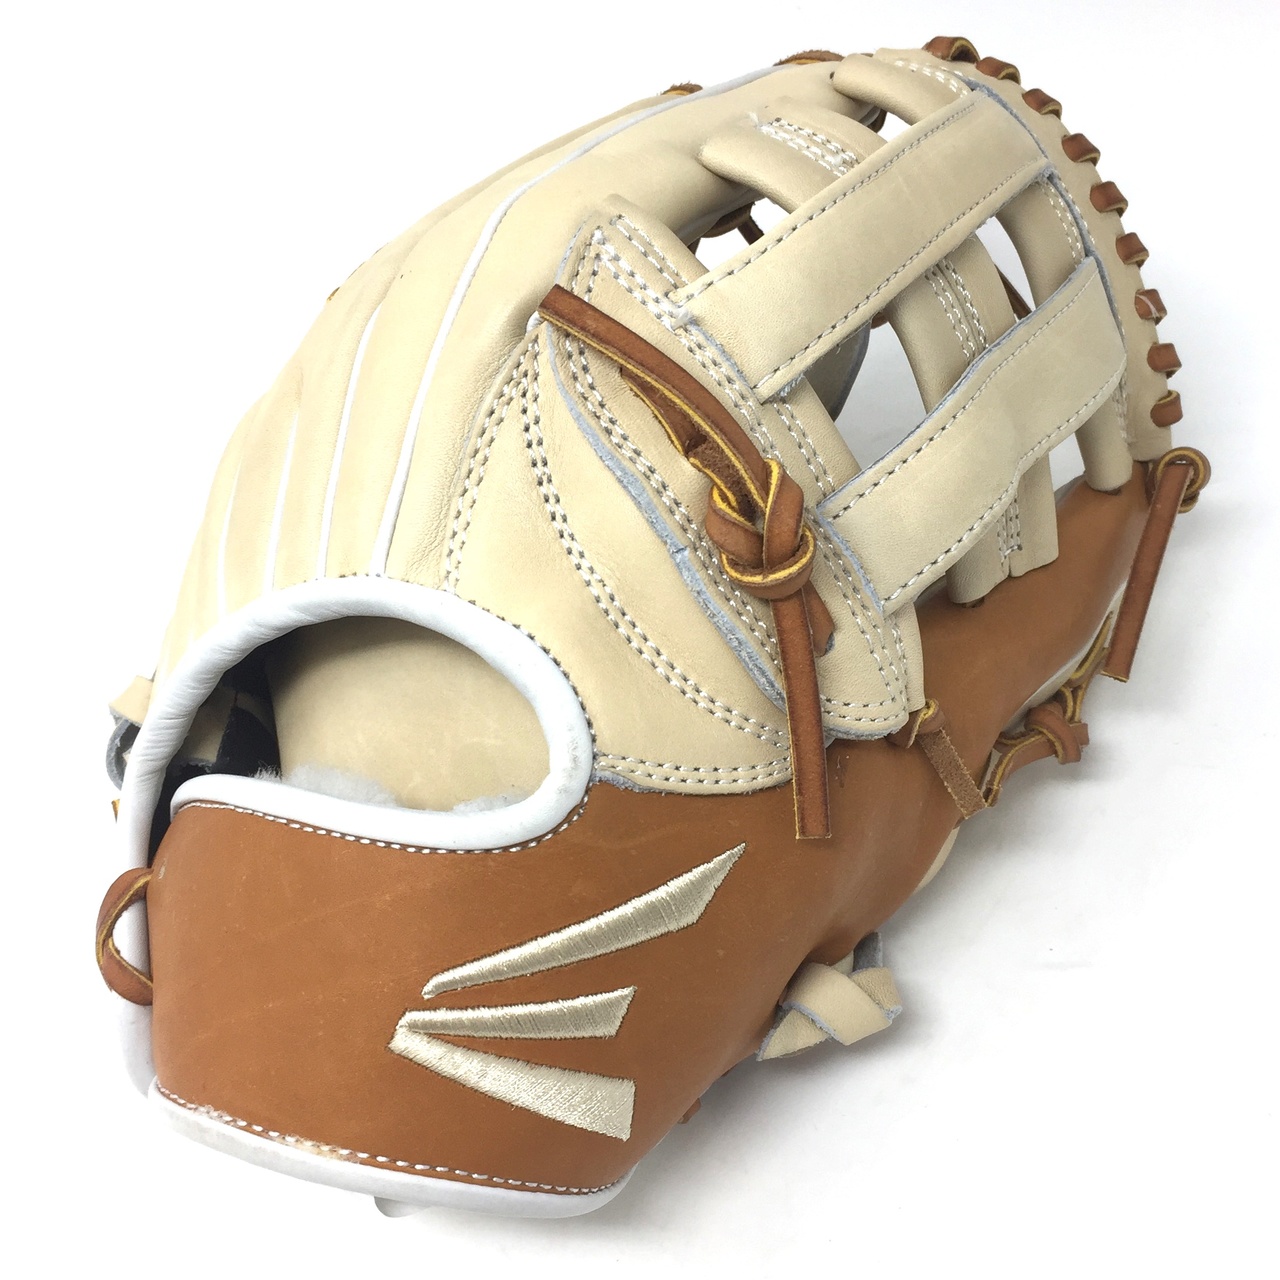 Easton's Small Batch project focuses on ball glove development using only premium leathers, unique designs and exceptional materials. Easton's passionate pursuit of superior craftsmanship allows them to innovate and experiment collaboratively with world-renowned tanneries and master pattern makers.